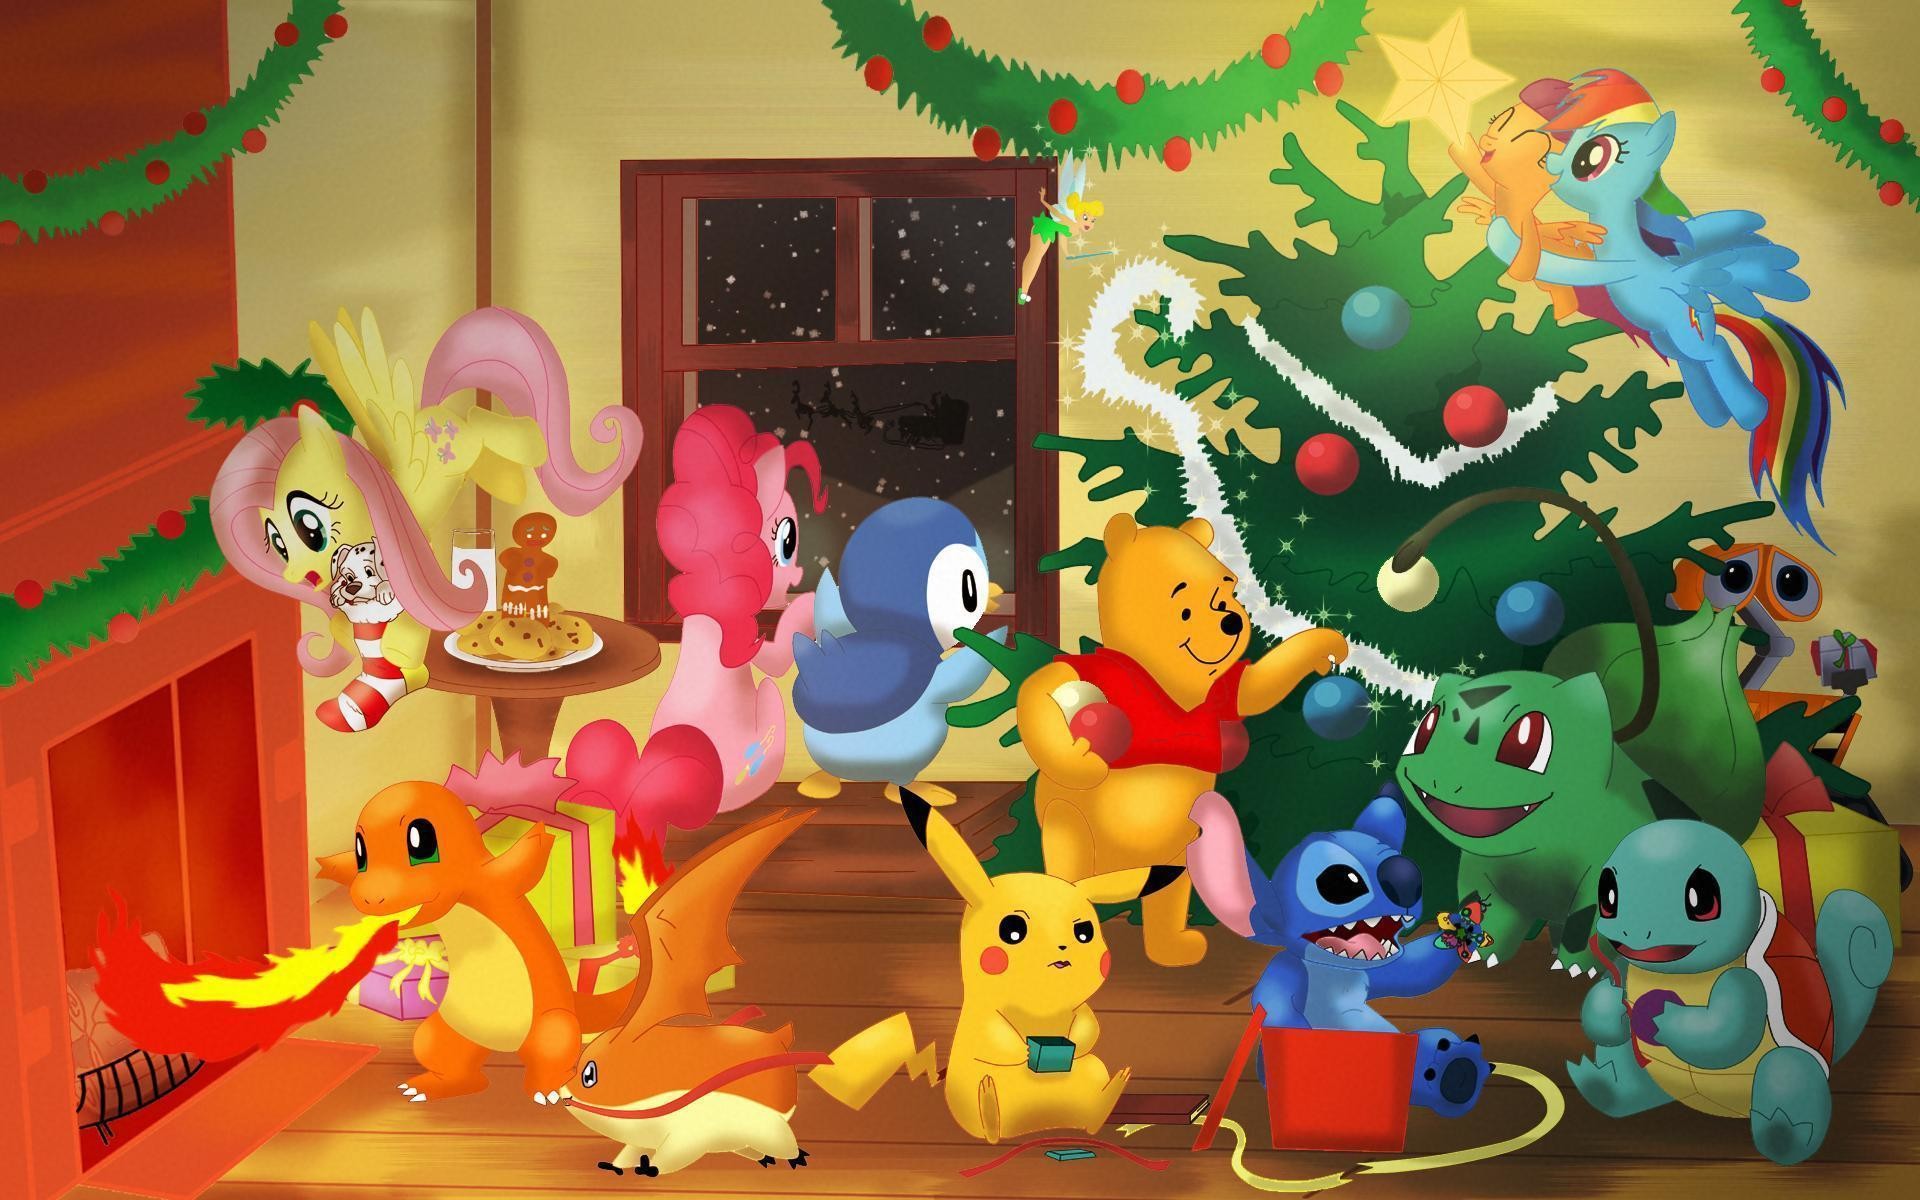 Free Download Christmas Cartoon Wallpaper 62 Images 1920x1200 For Your Desktop Mobile Tablet Explore 50 Merry Christmas Cartoon Wallpapers Merry Christmas Cartoon Wallpapers Merry Christmas Wallpaper Merry Christmas Background